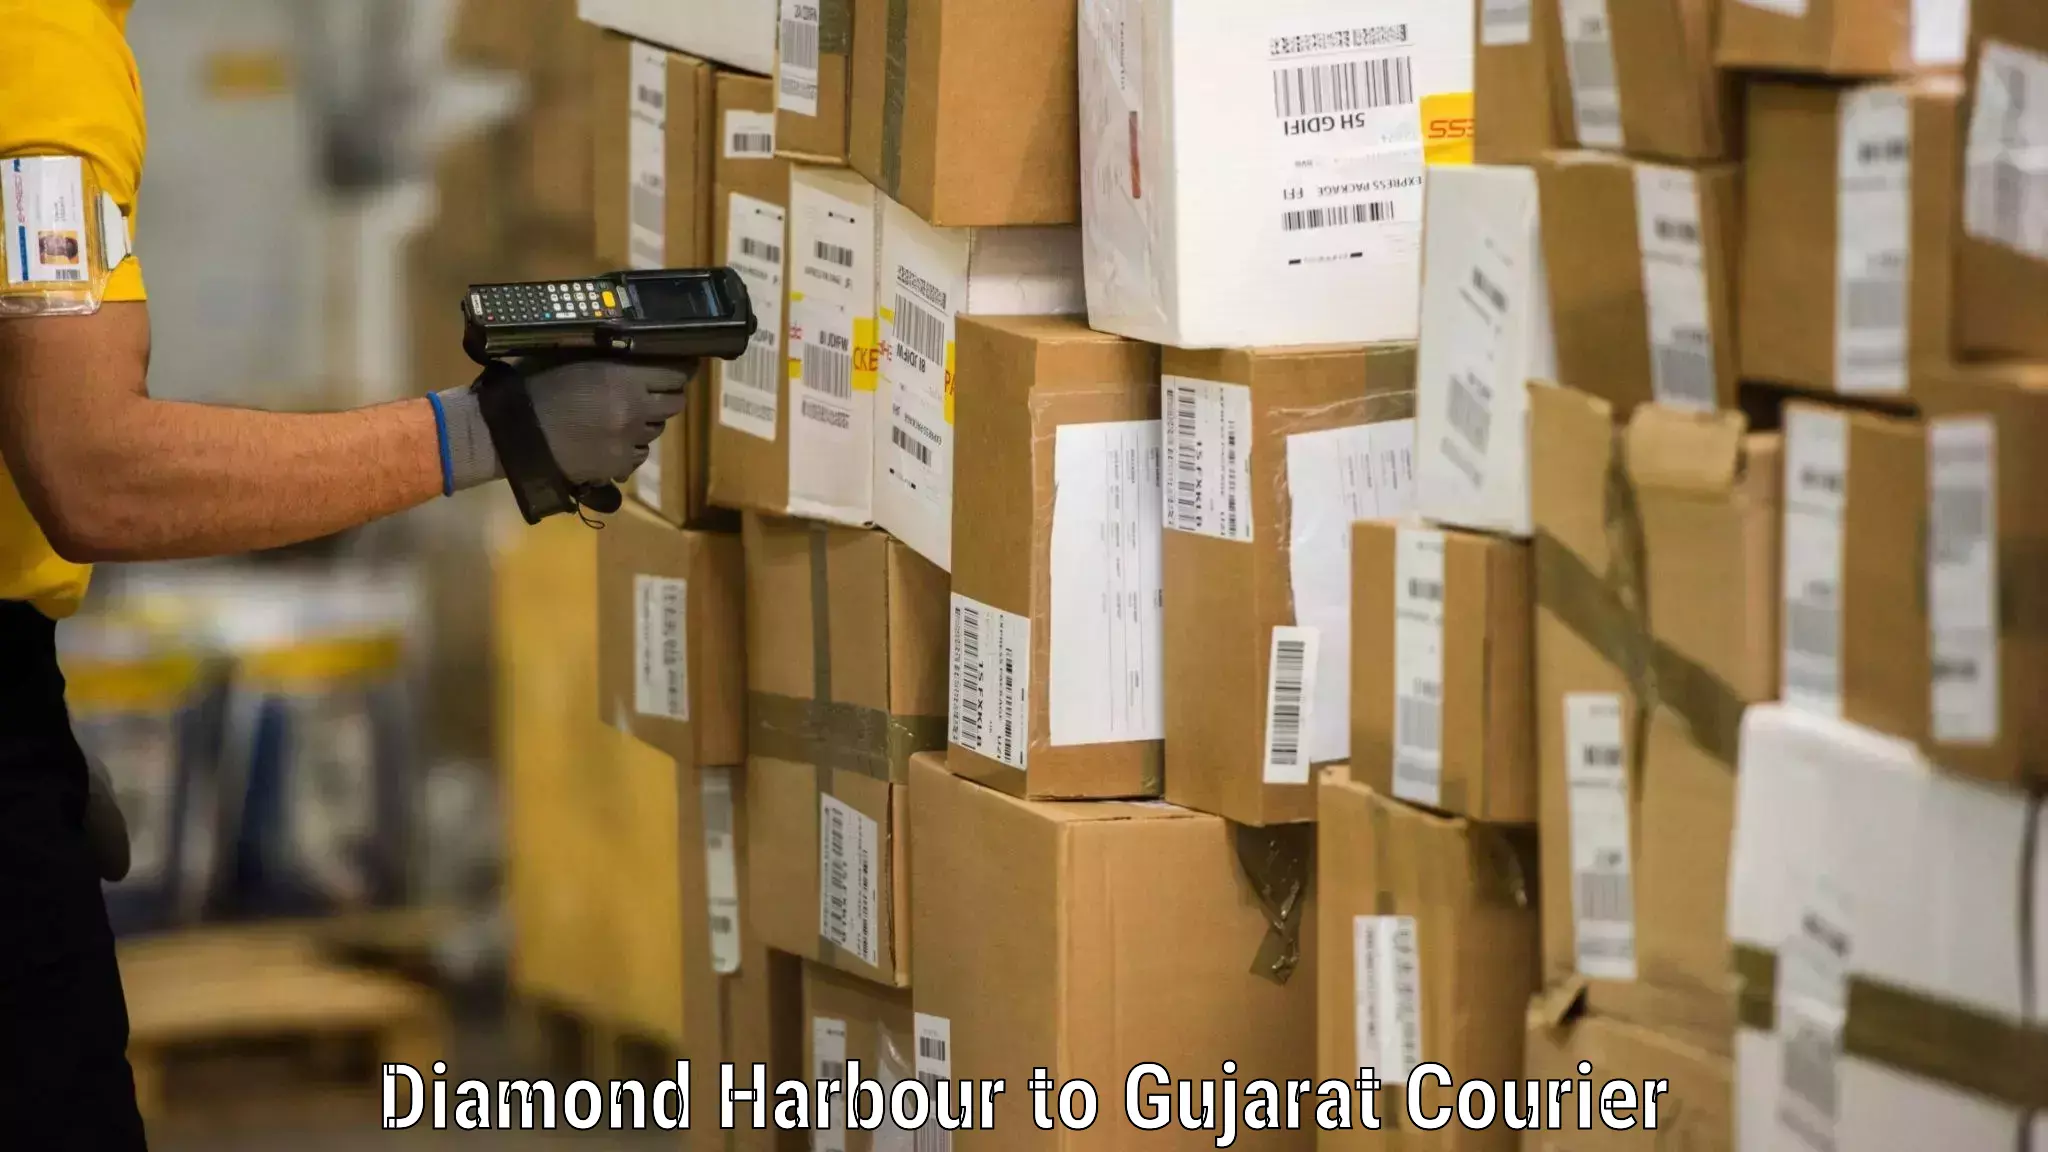 Moving and packing experts Diamond Harbour to Gujarat